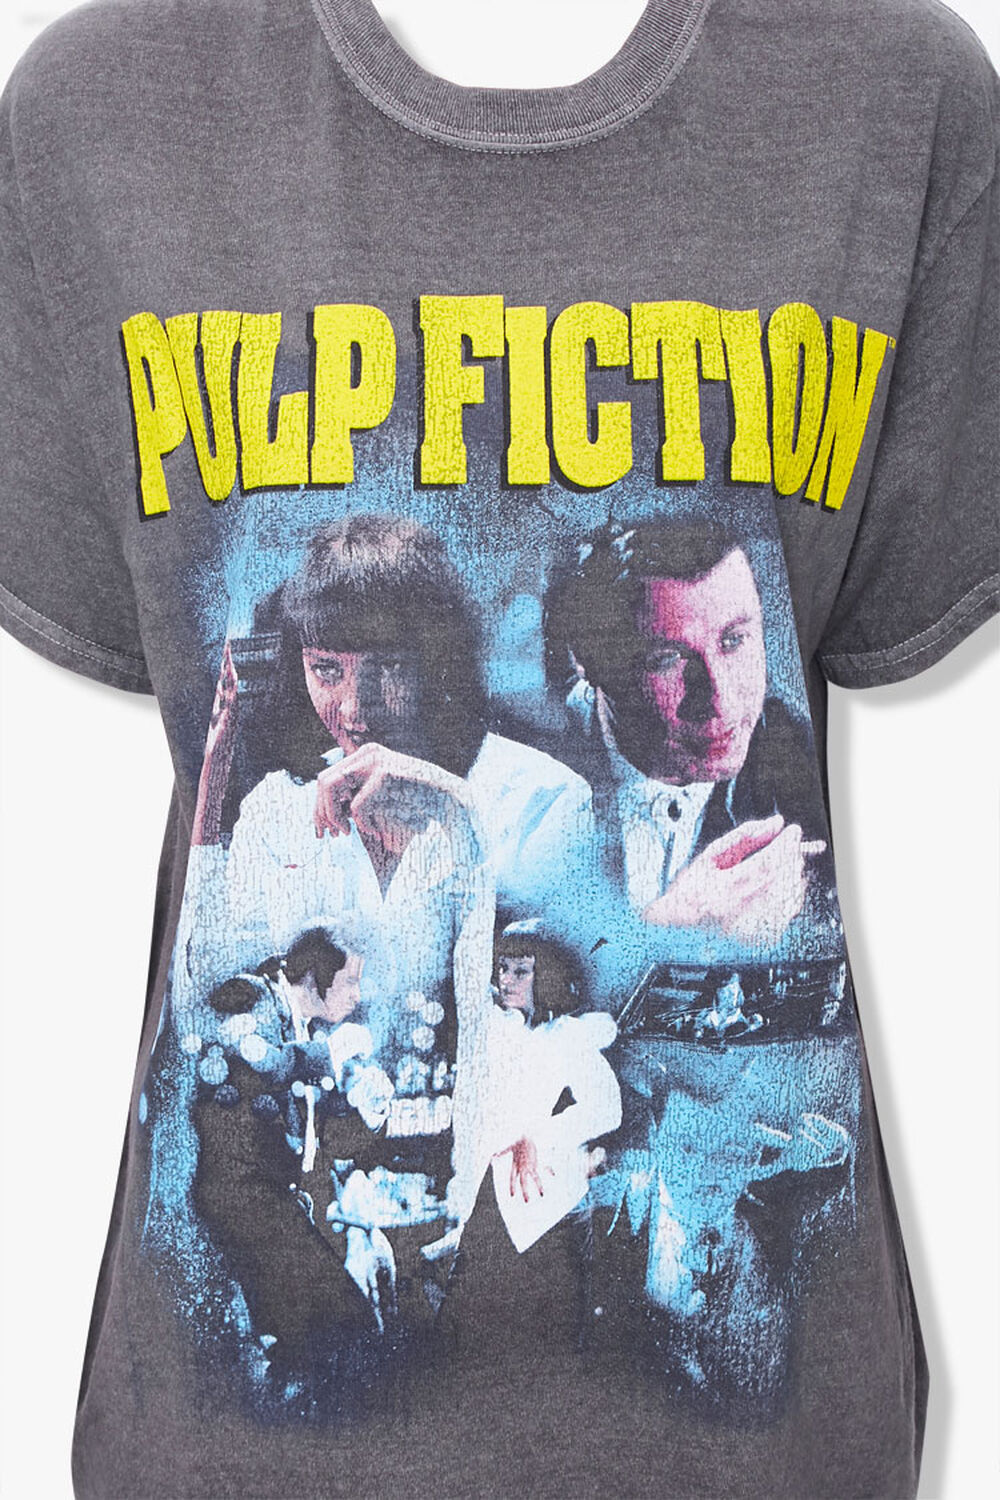 CHARCOAL/MULTI Pulp Fiction Graphic Tee, image 3